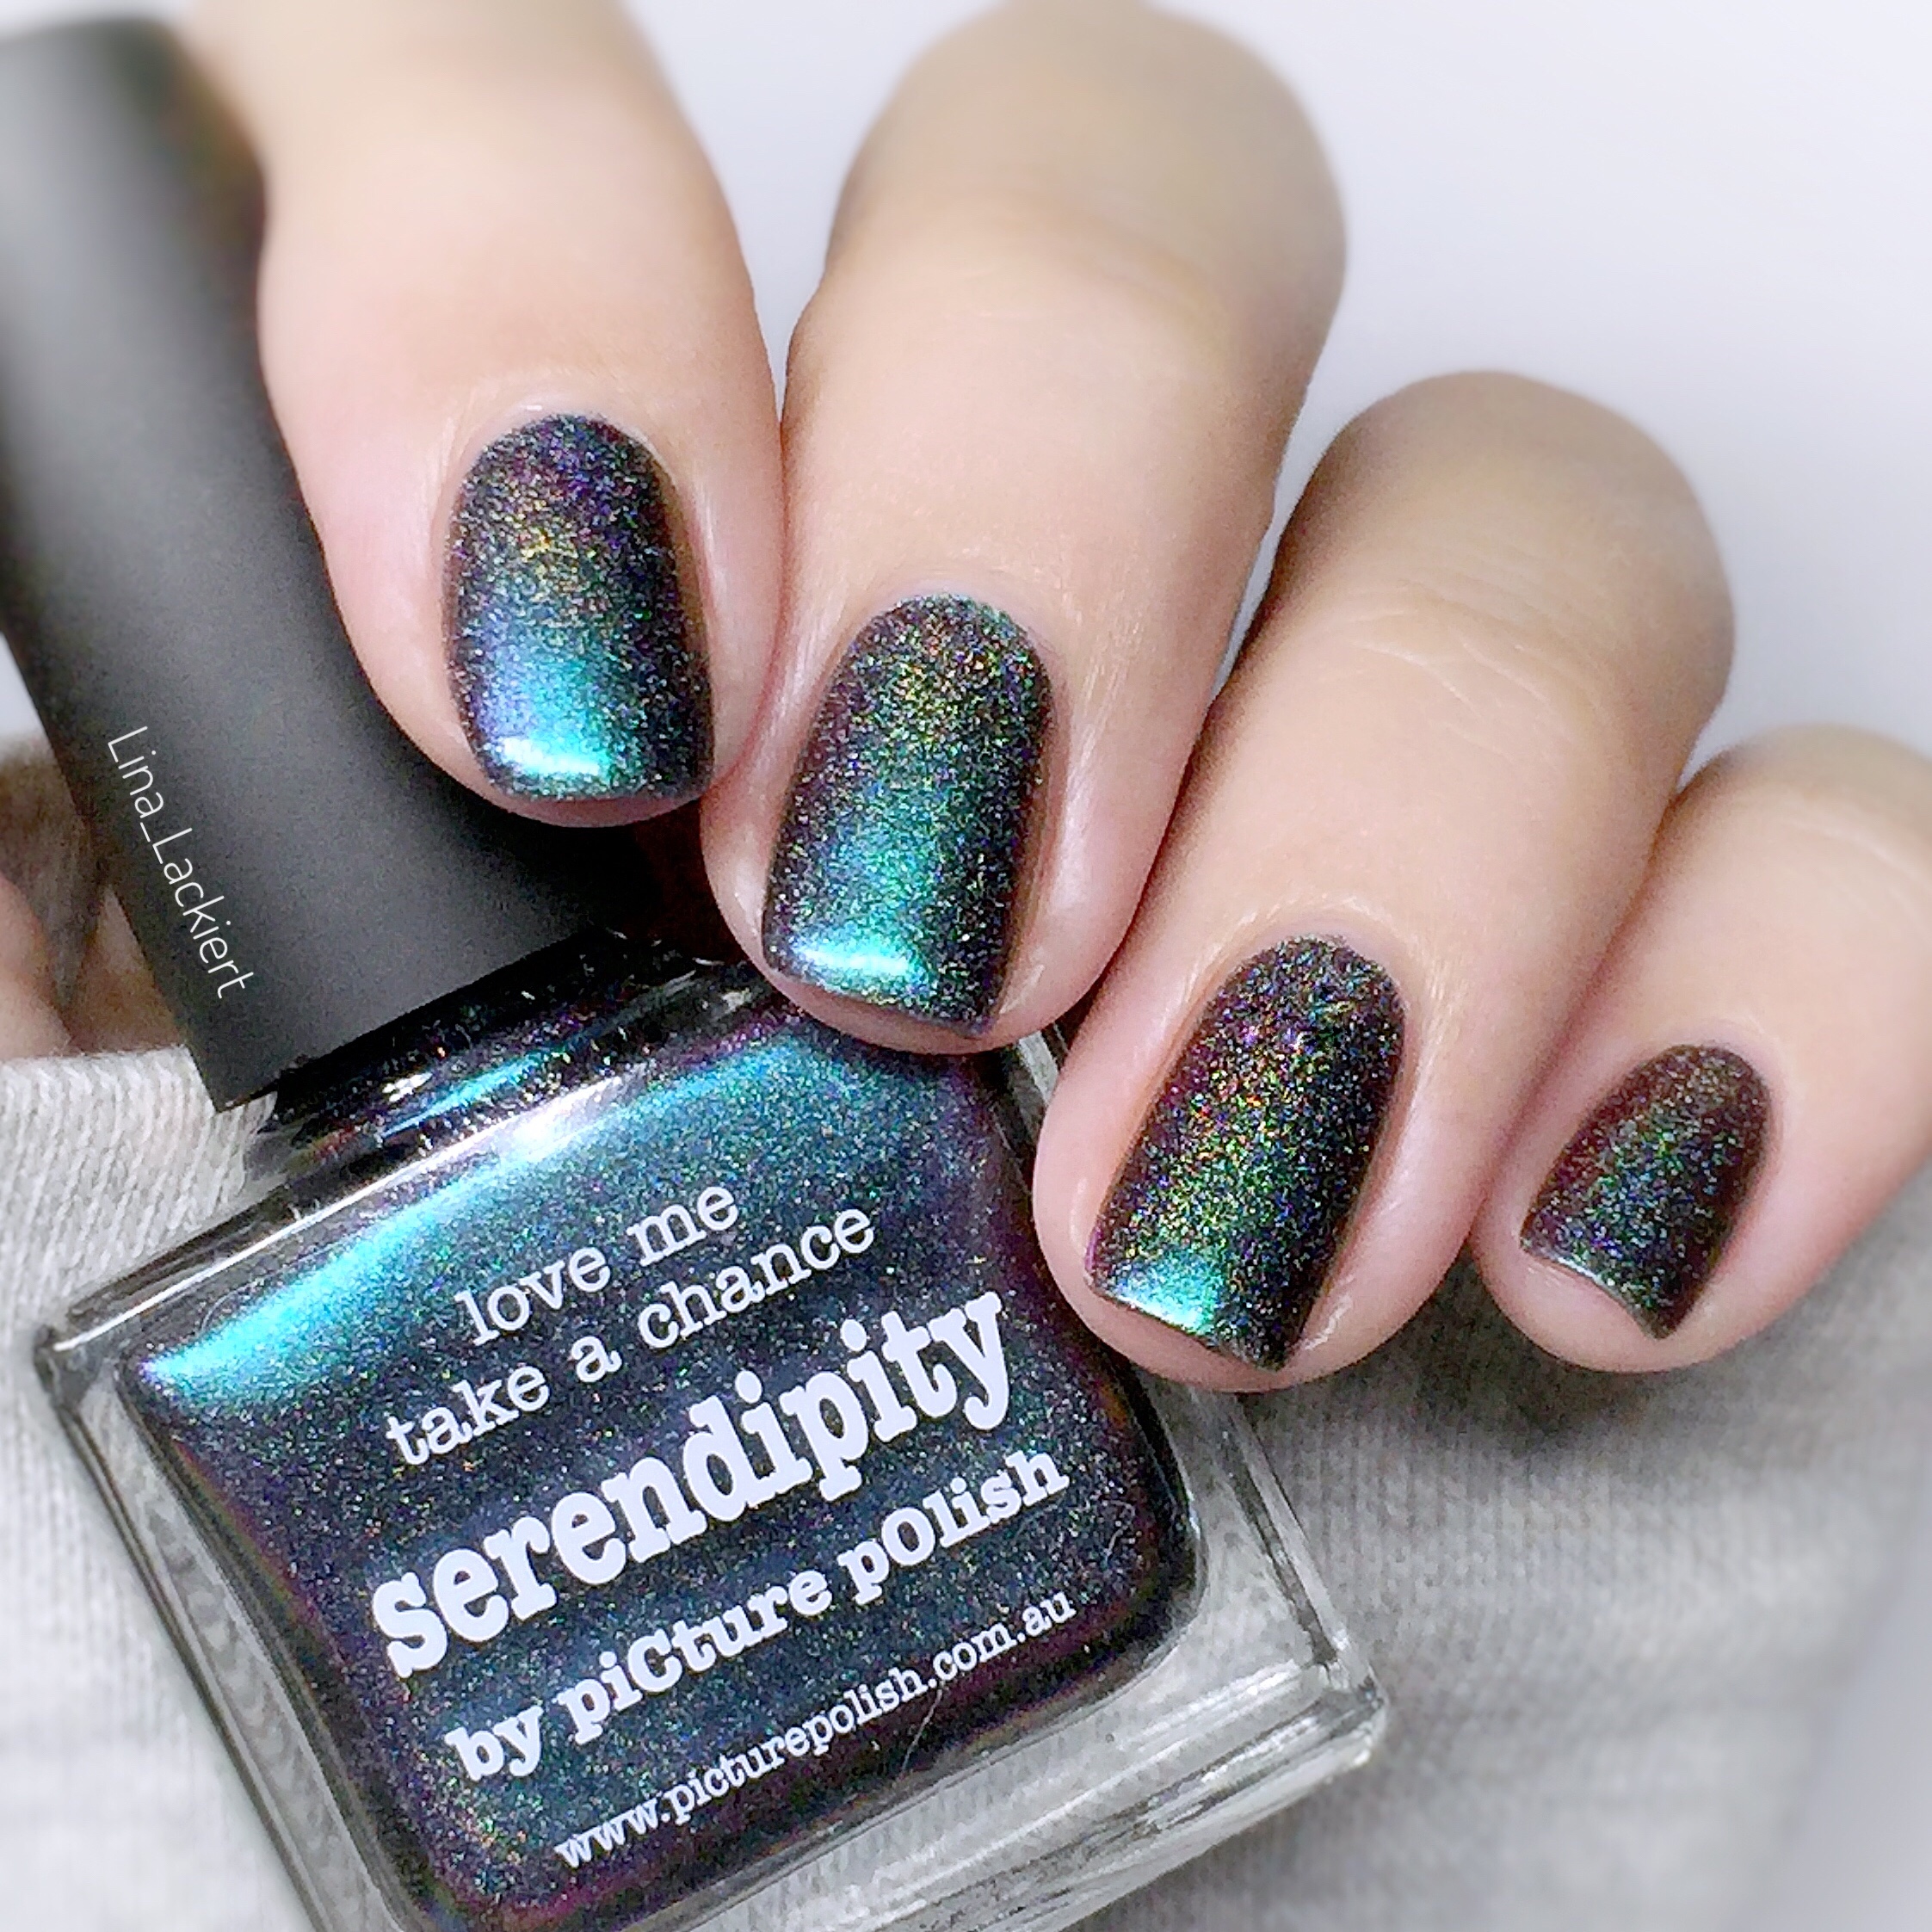 serendipity from picture polish 